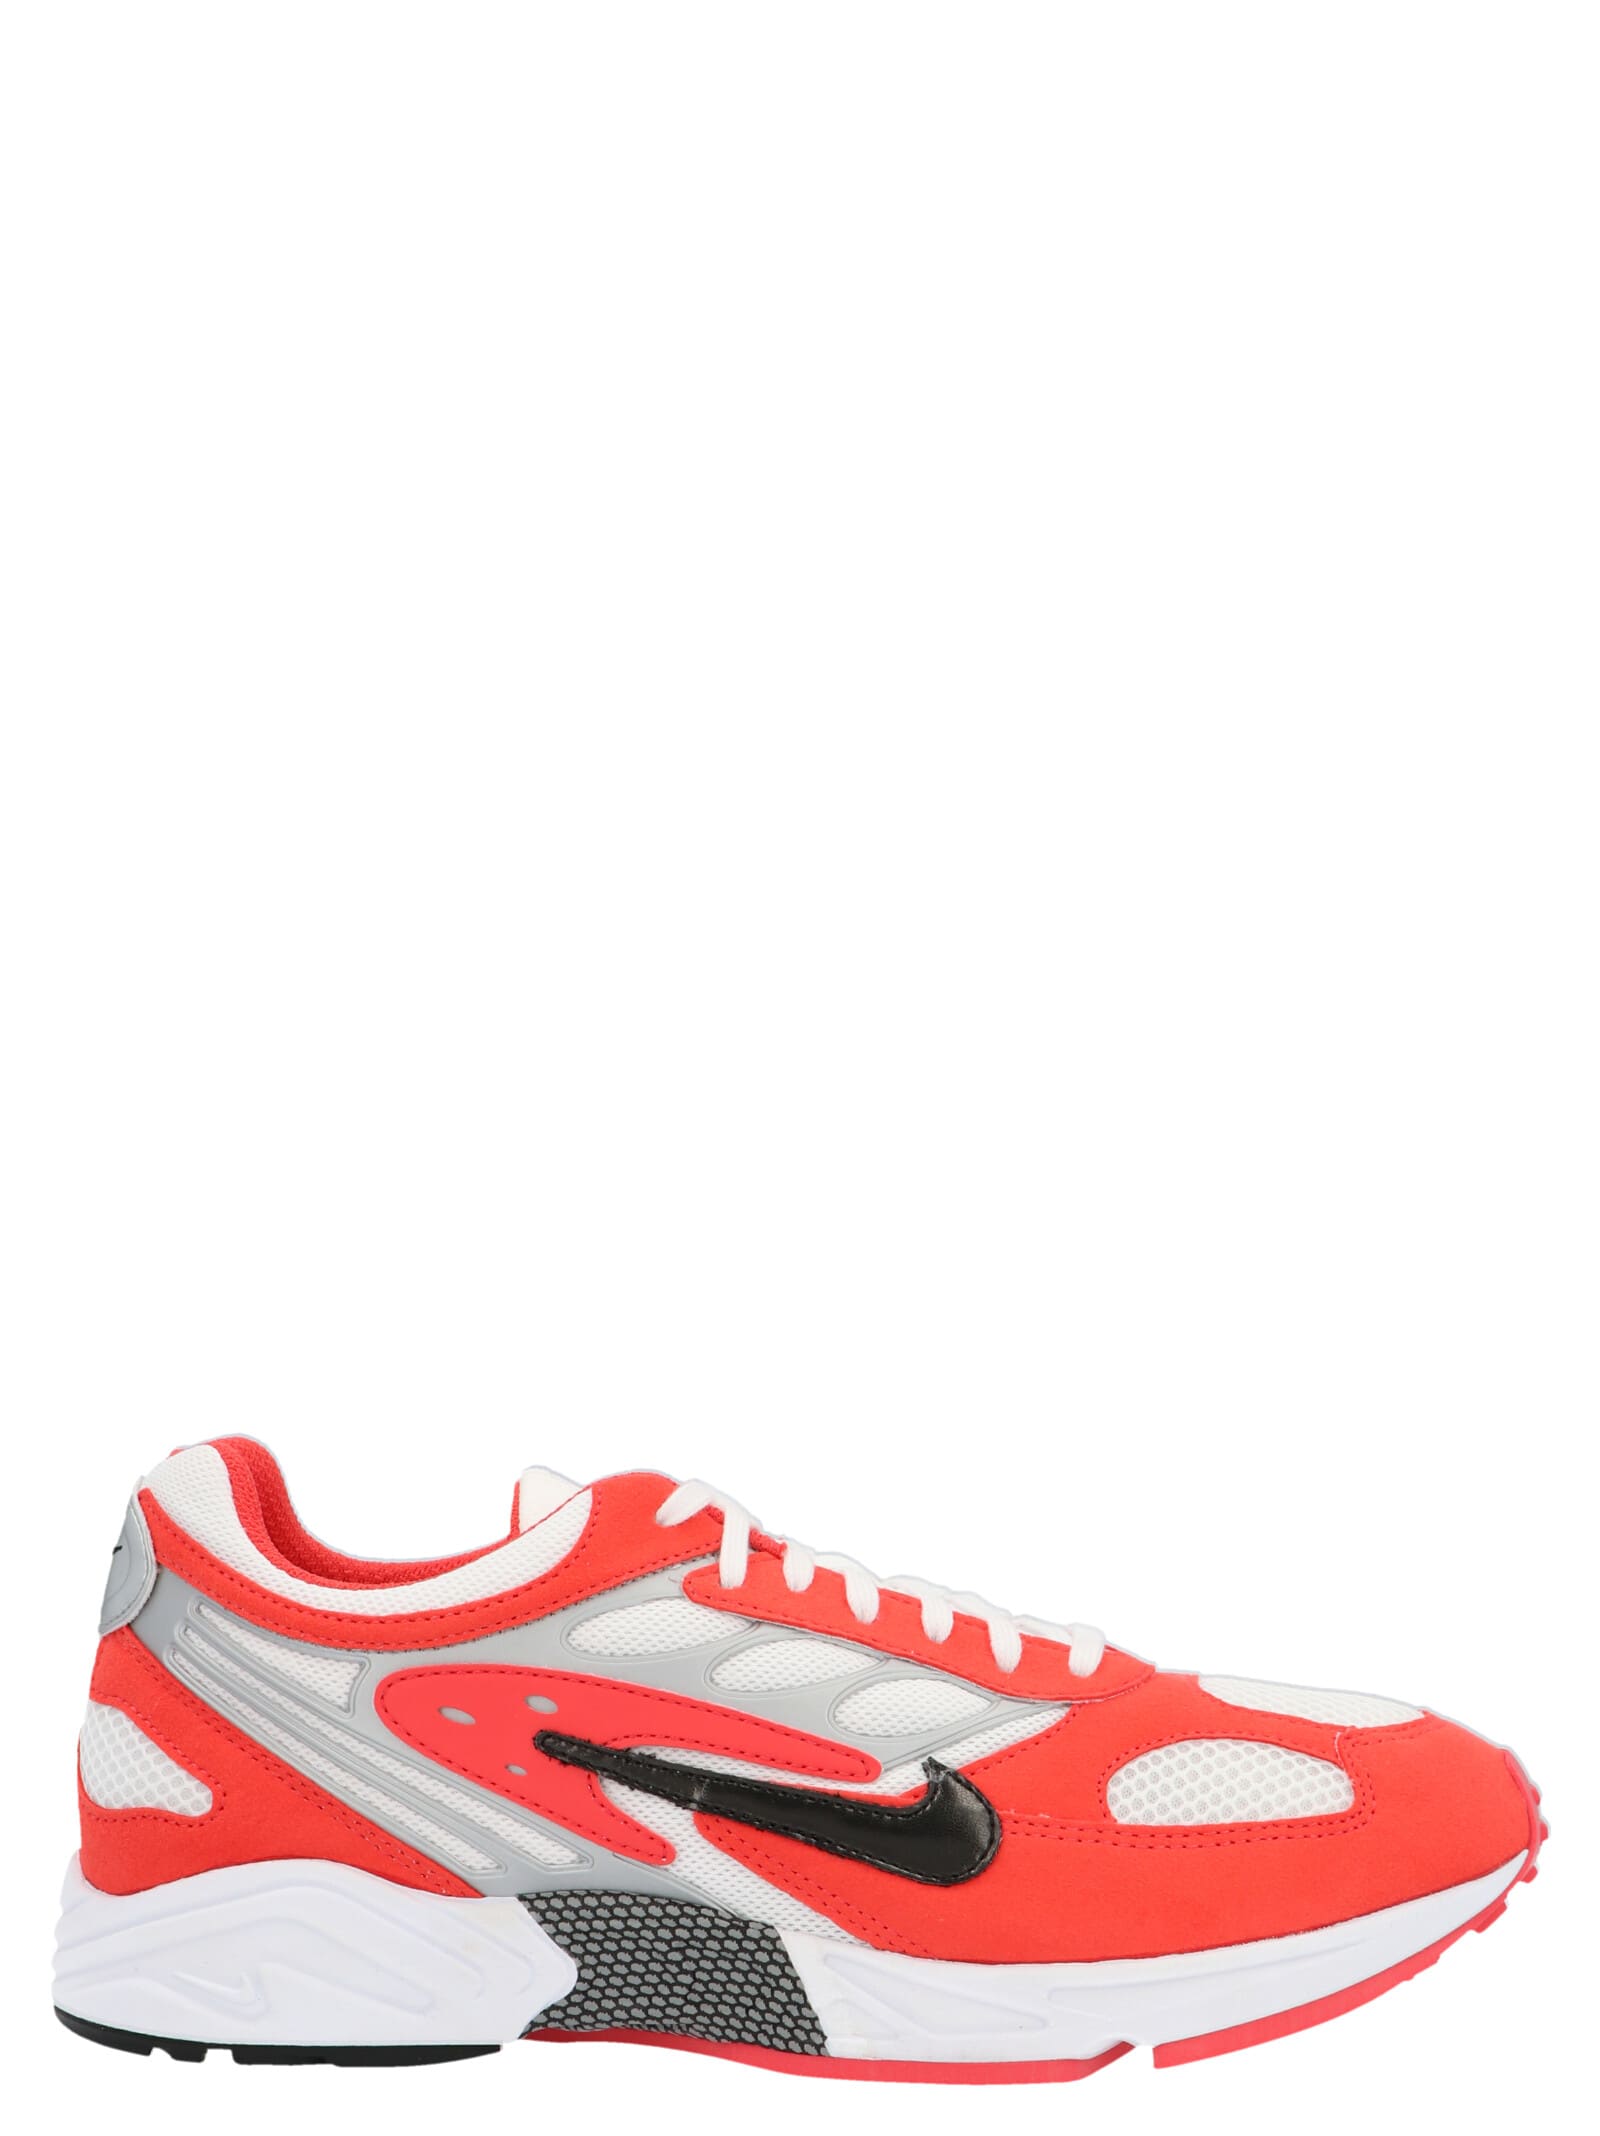 NIKE AIR GHOST RACER SHOES,AT5410 601